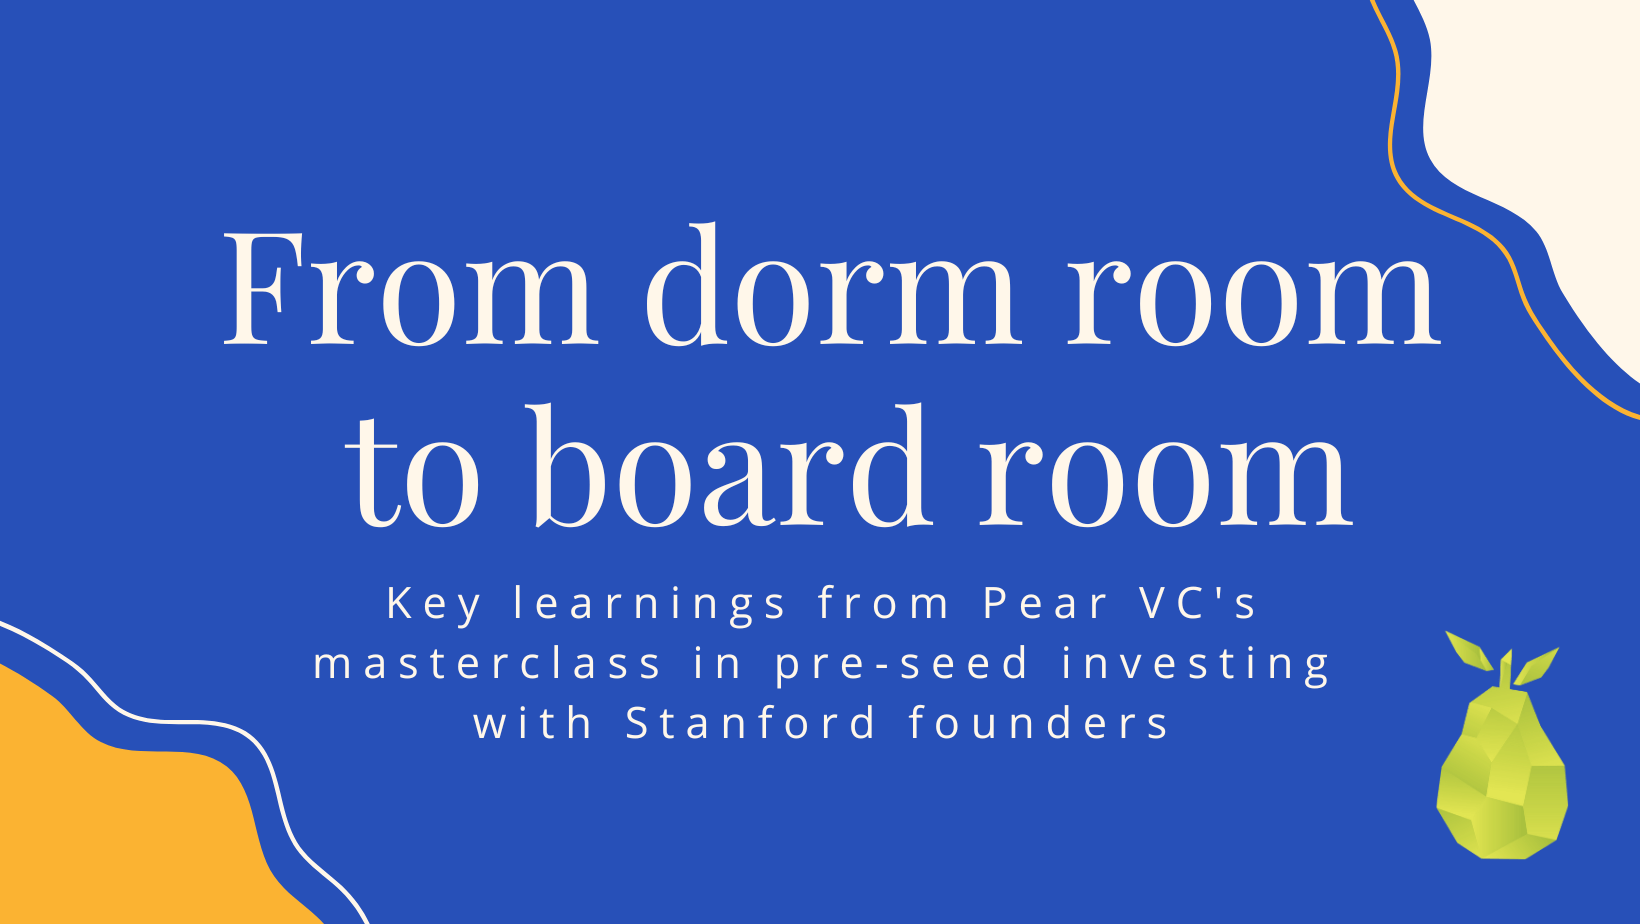 Dorm room to board room: key learnings from Pear VC’s masterclass in pre-seed investing with Stanford founders